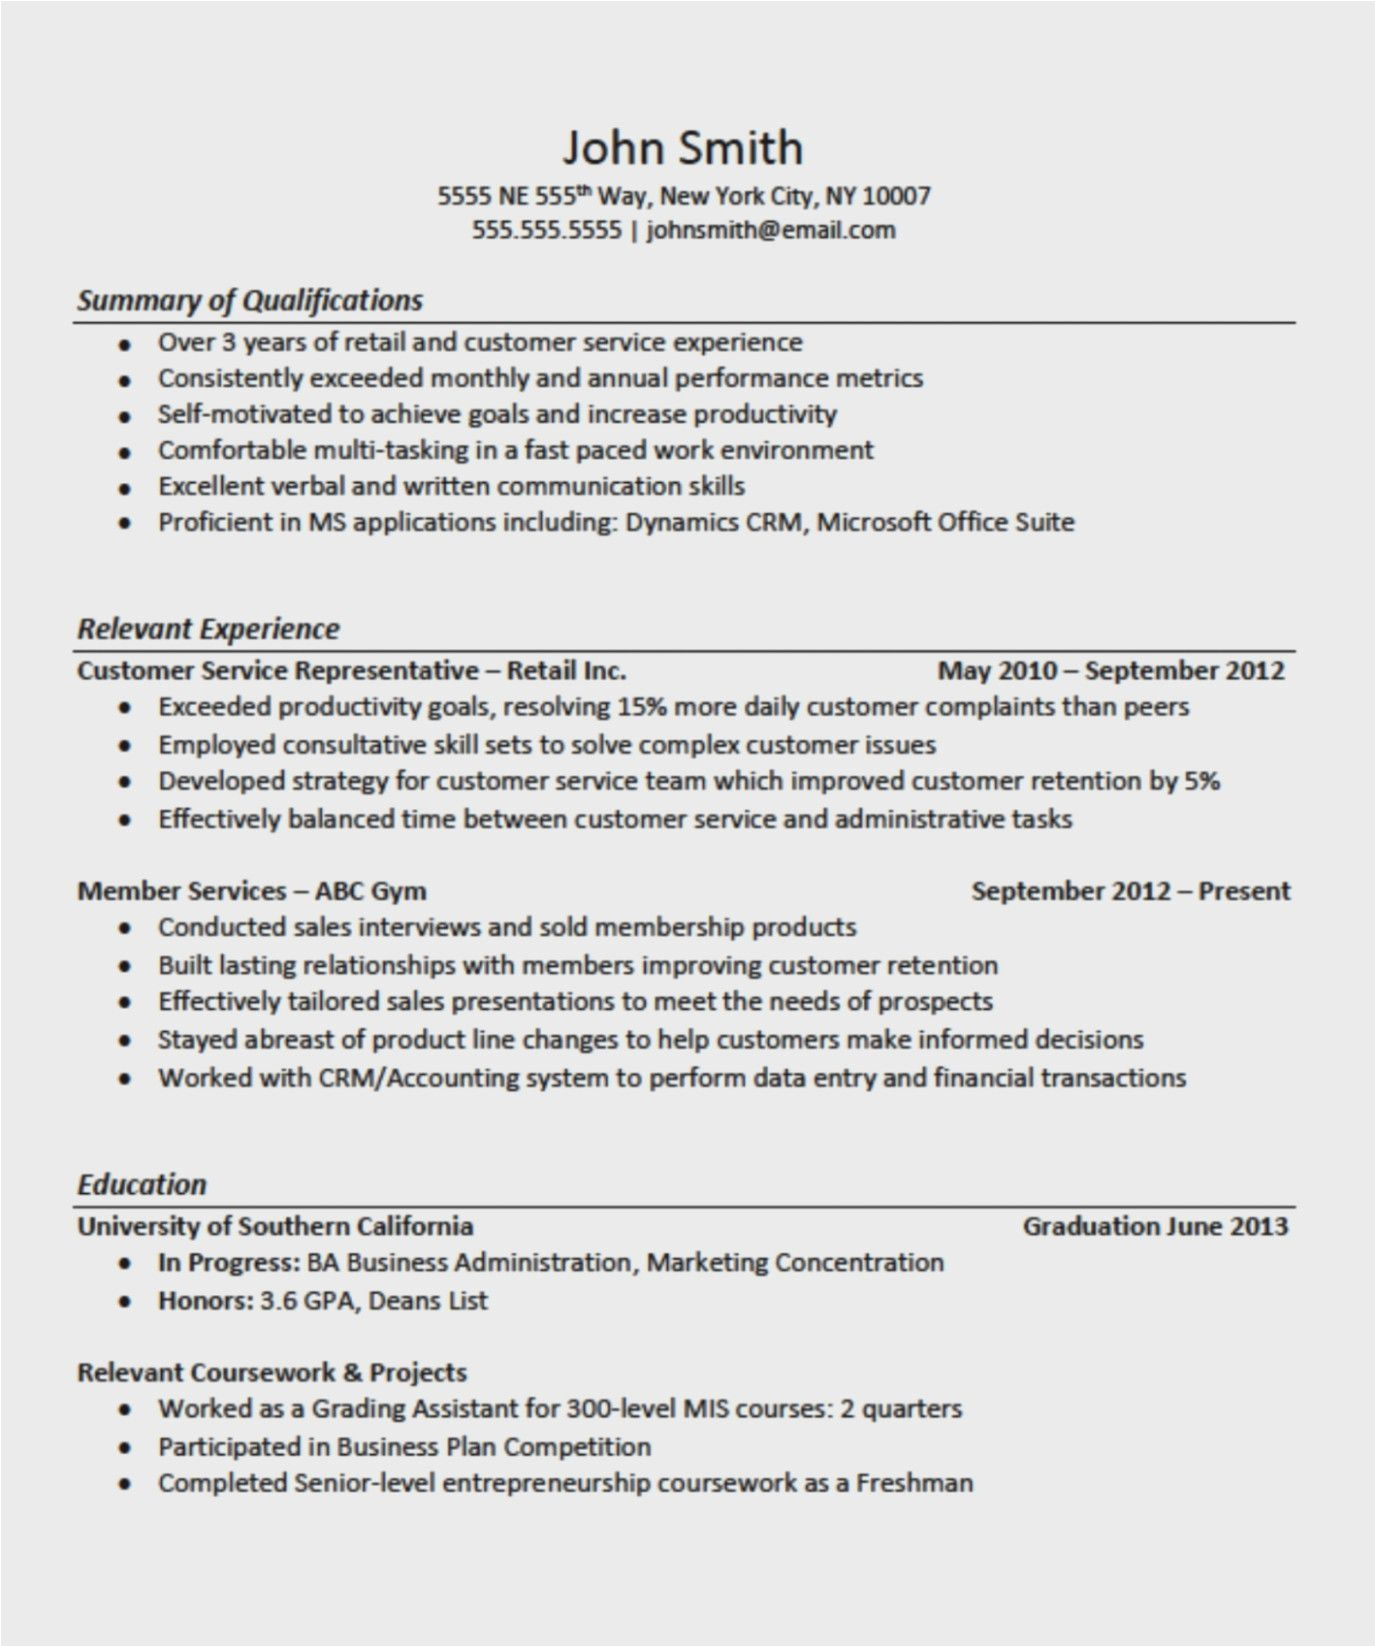 Resume for Career Change with No Experience Sample Wunderbar Resume for Career Change with No Experience